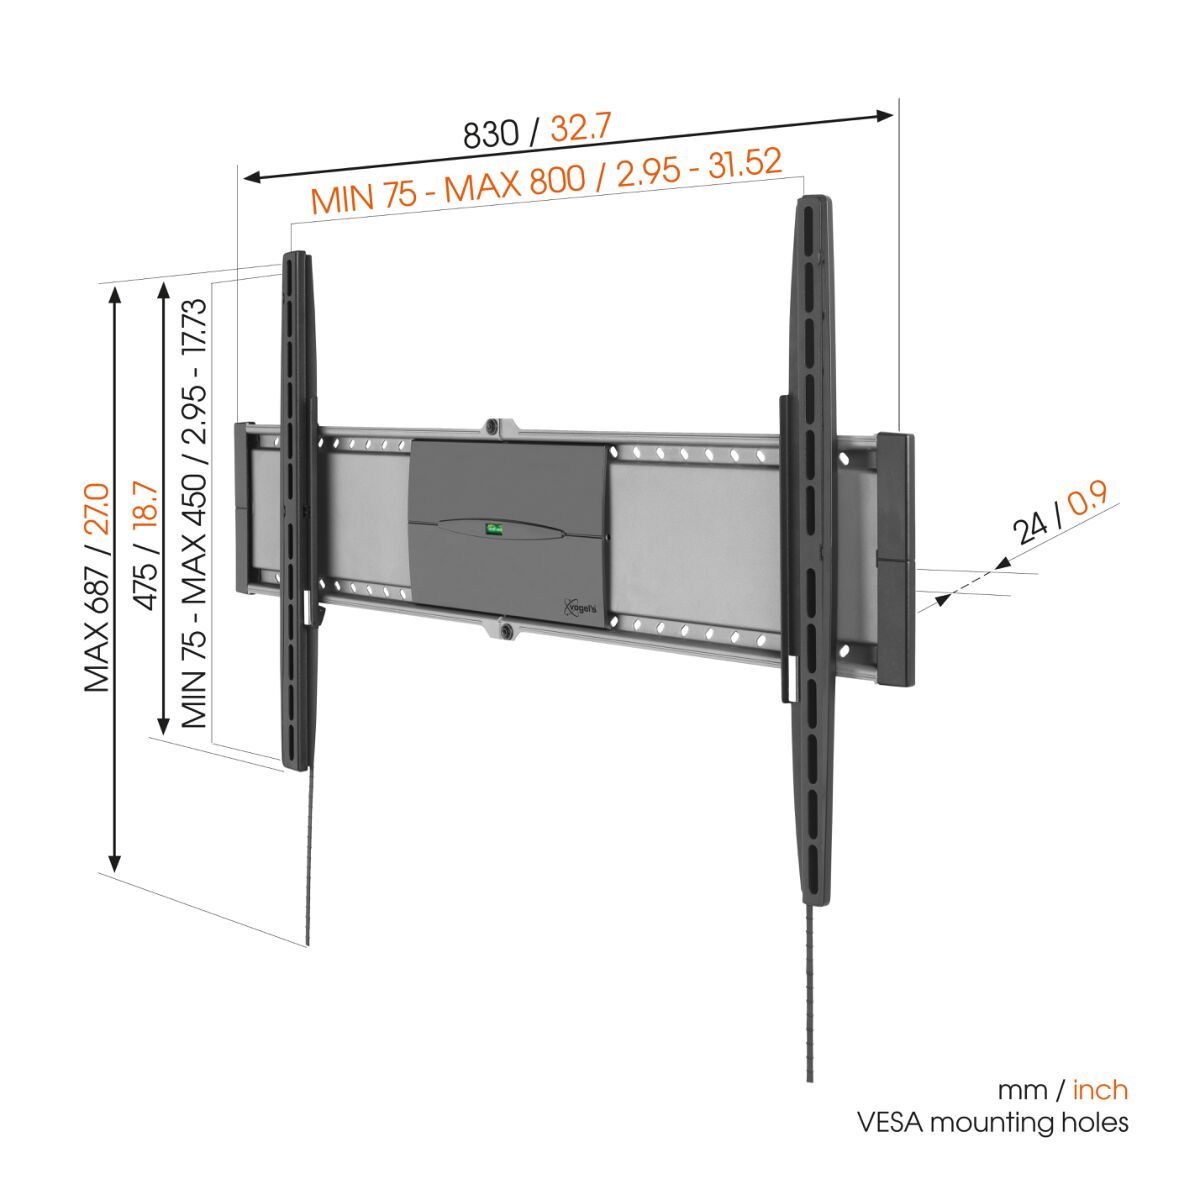 Vogel's EFW 8305 Fixed TV Wall Mount - Suitable for 40 up to 80 inch TVs up to Dimensions